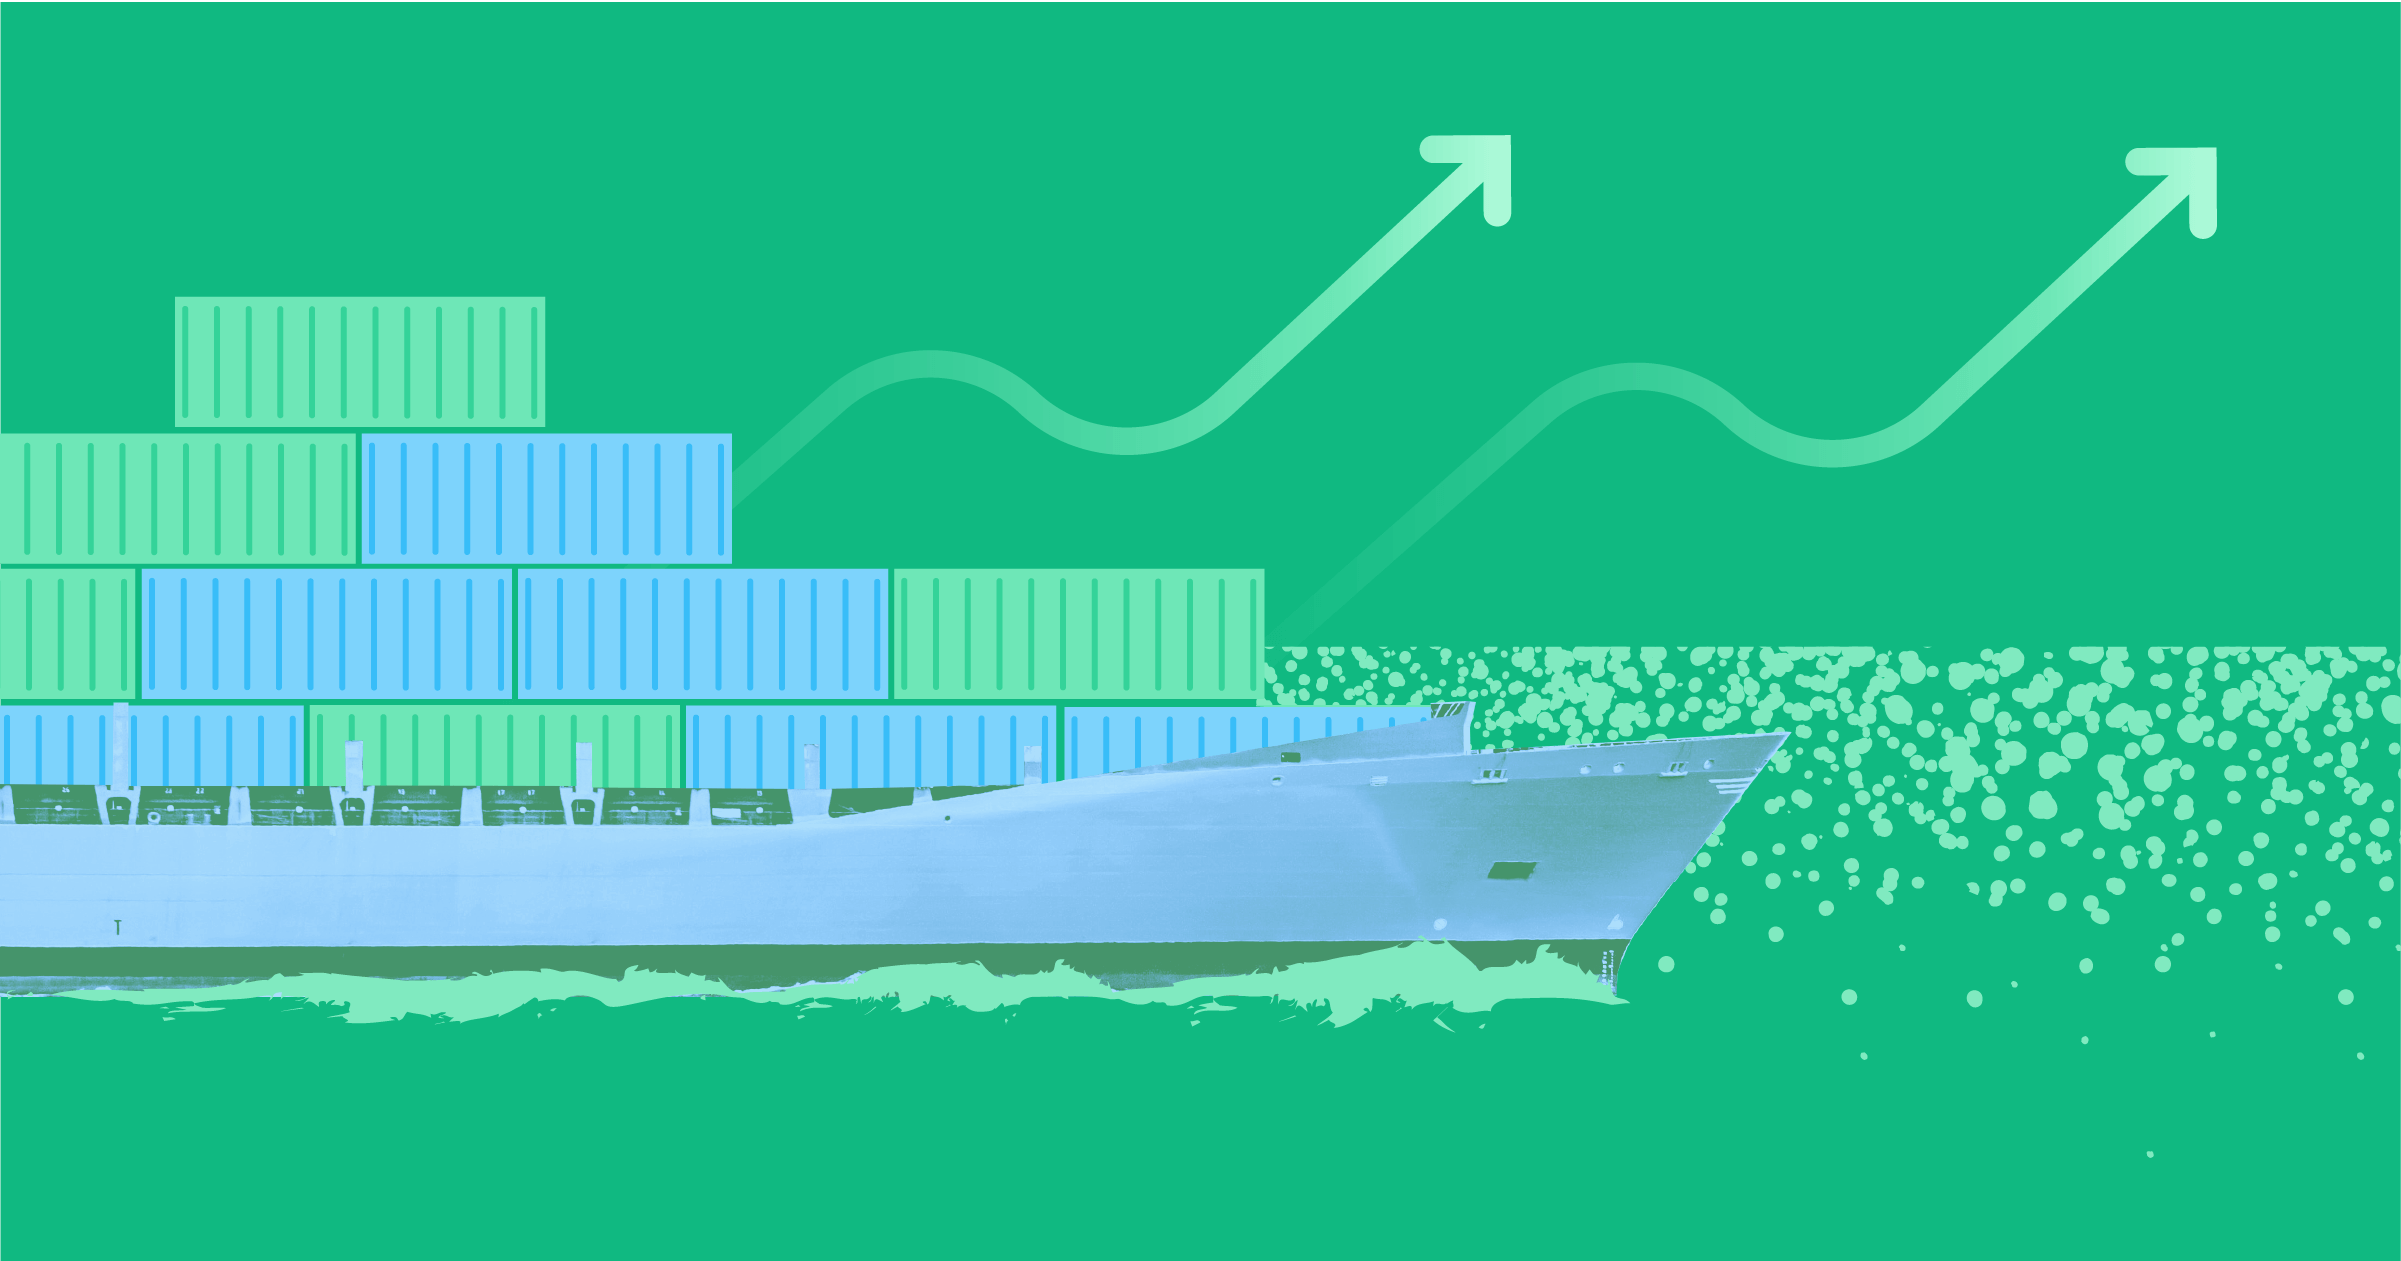 How to recover costs from freight increases (and other eCommerce tips)